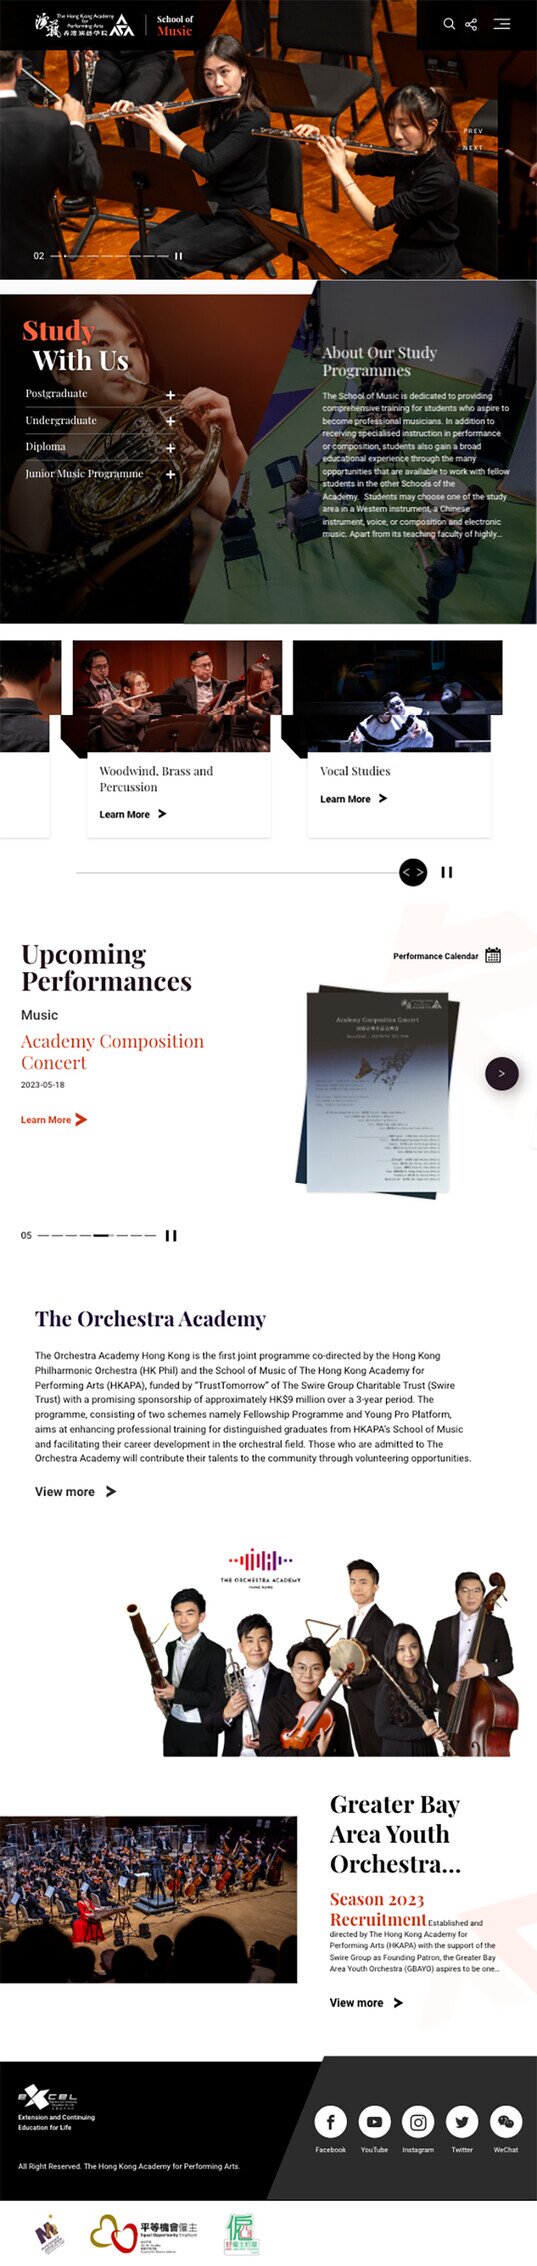 Hong Kong Academy for Performing Arts website screenshot for tablet version 2 of 6